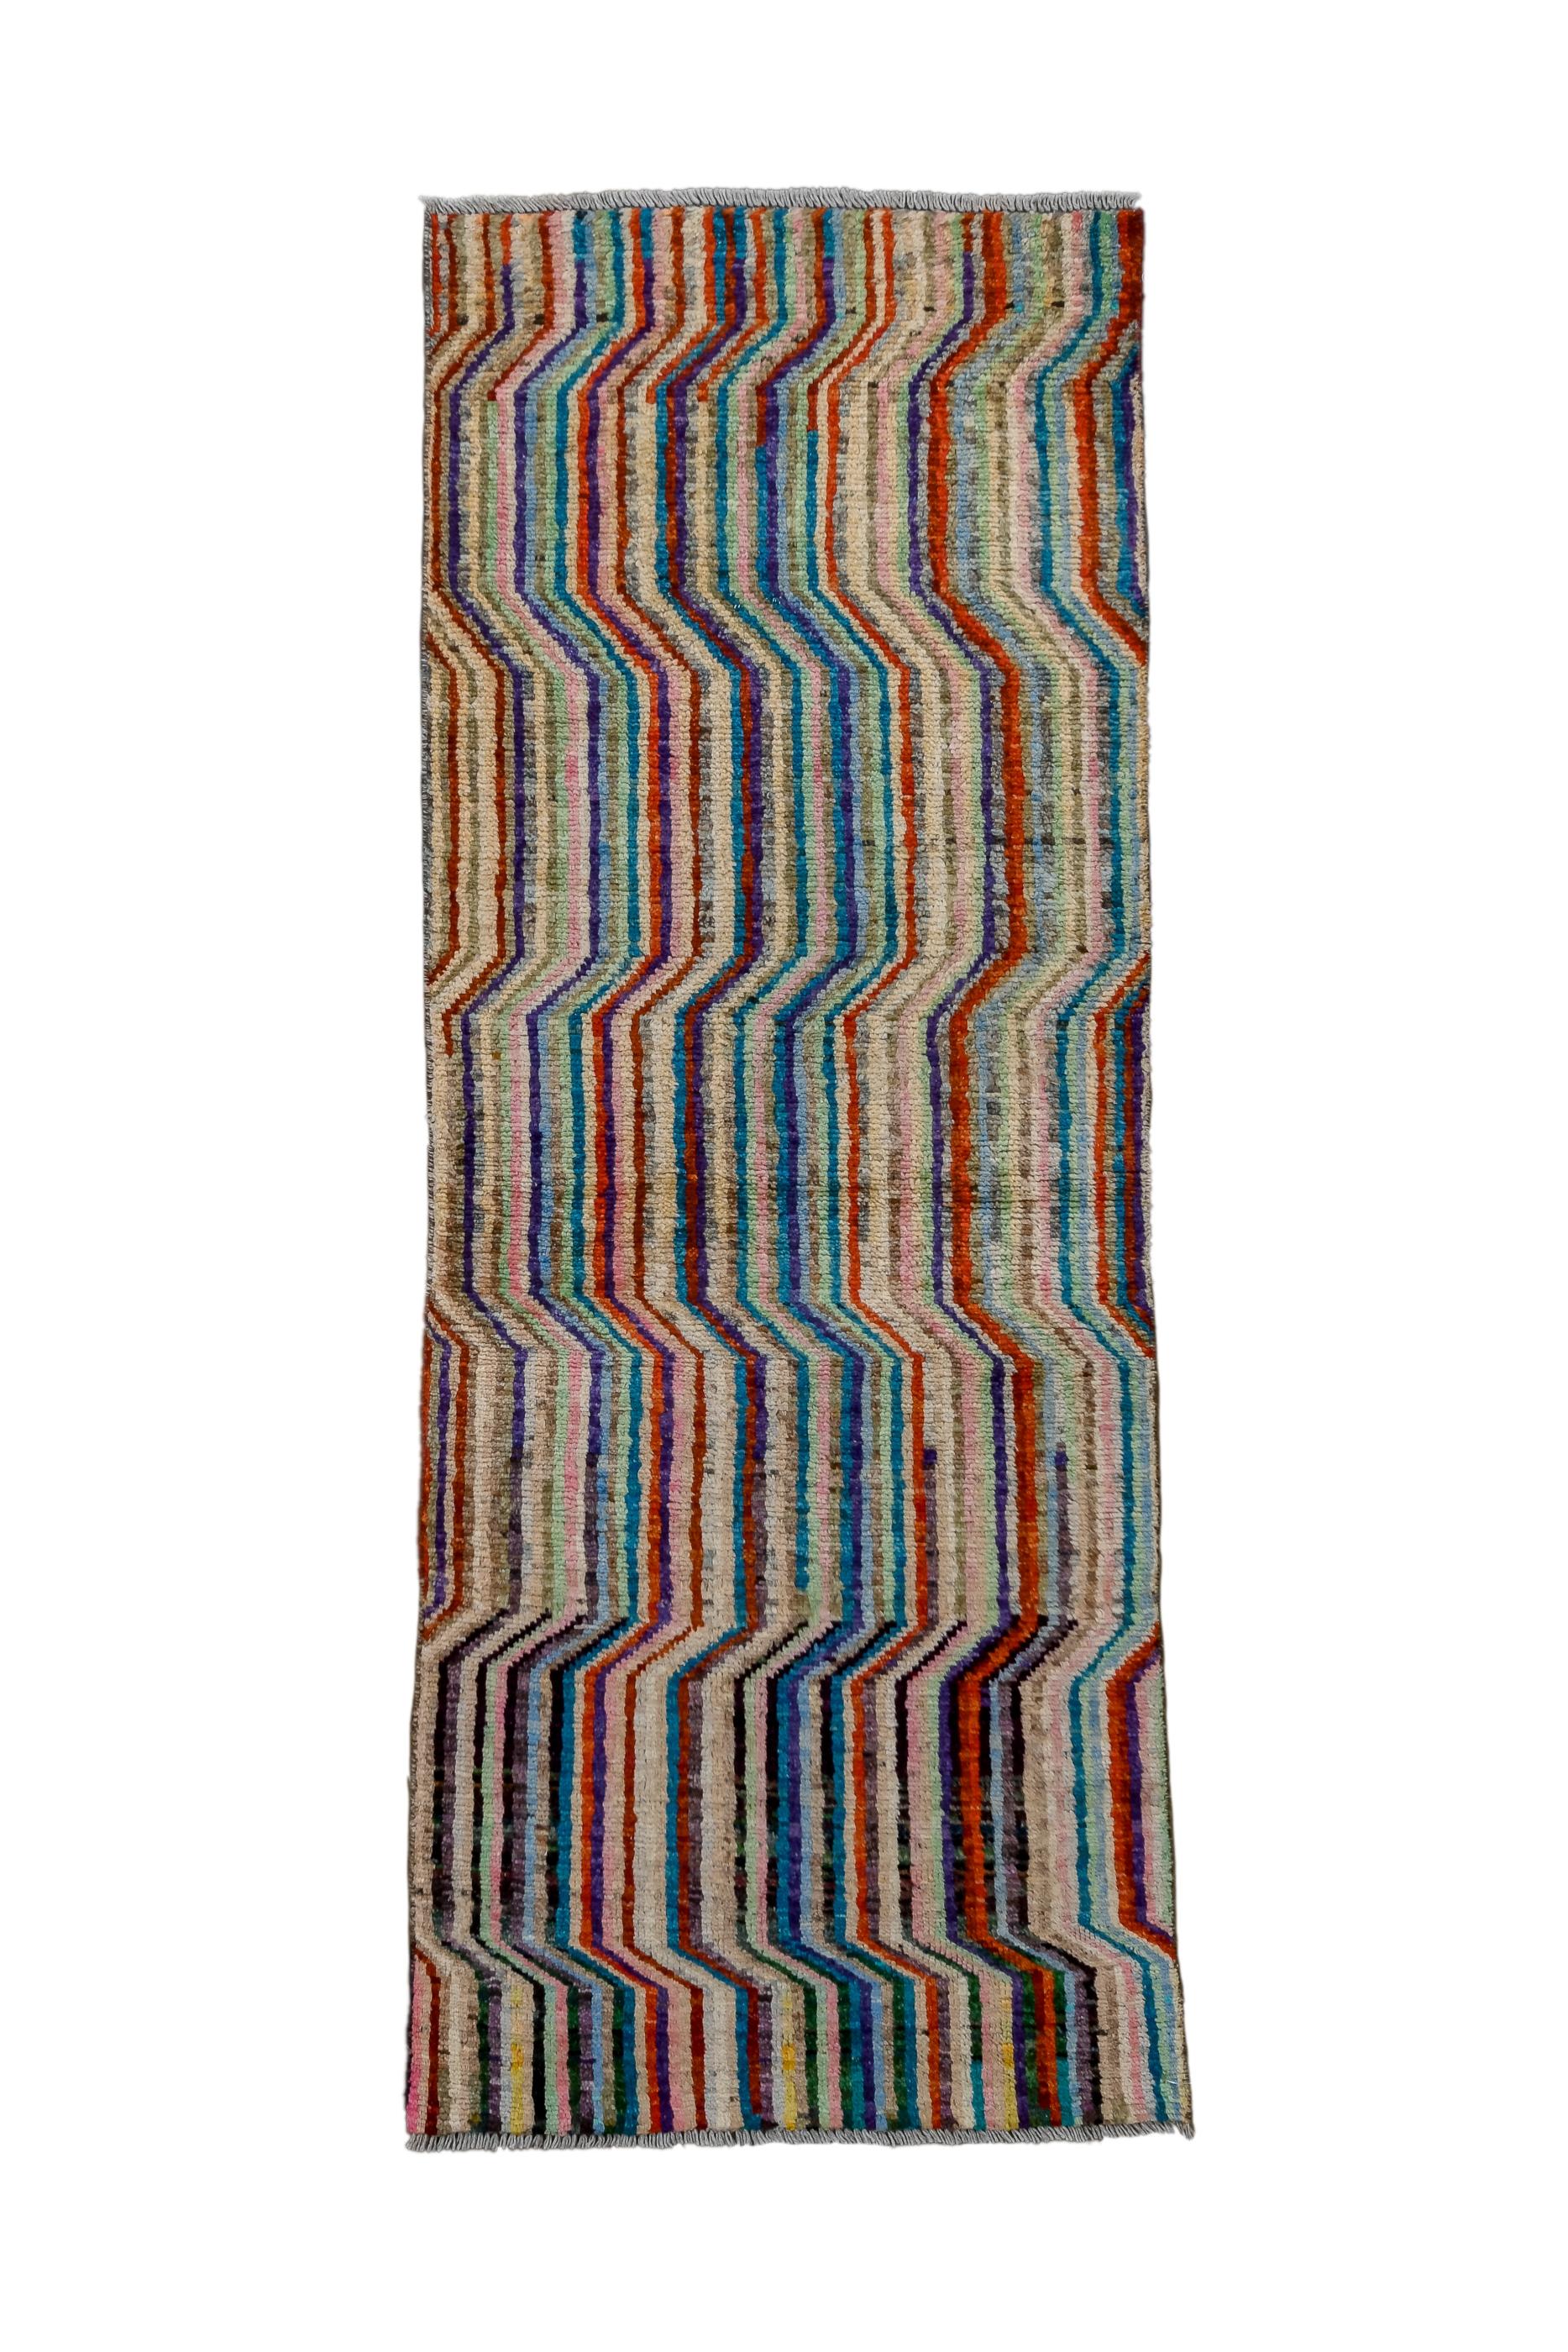 This long pile, elongated mat, shows a pattern of conforming, compressed, colourful trapezoidal meanders. No field tone, but a palette including:  luminous light blue,; sky blue; red; rust; beige; and ecru. Eye-dazzler pattern runs end to end and